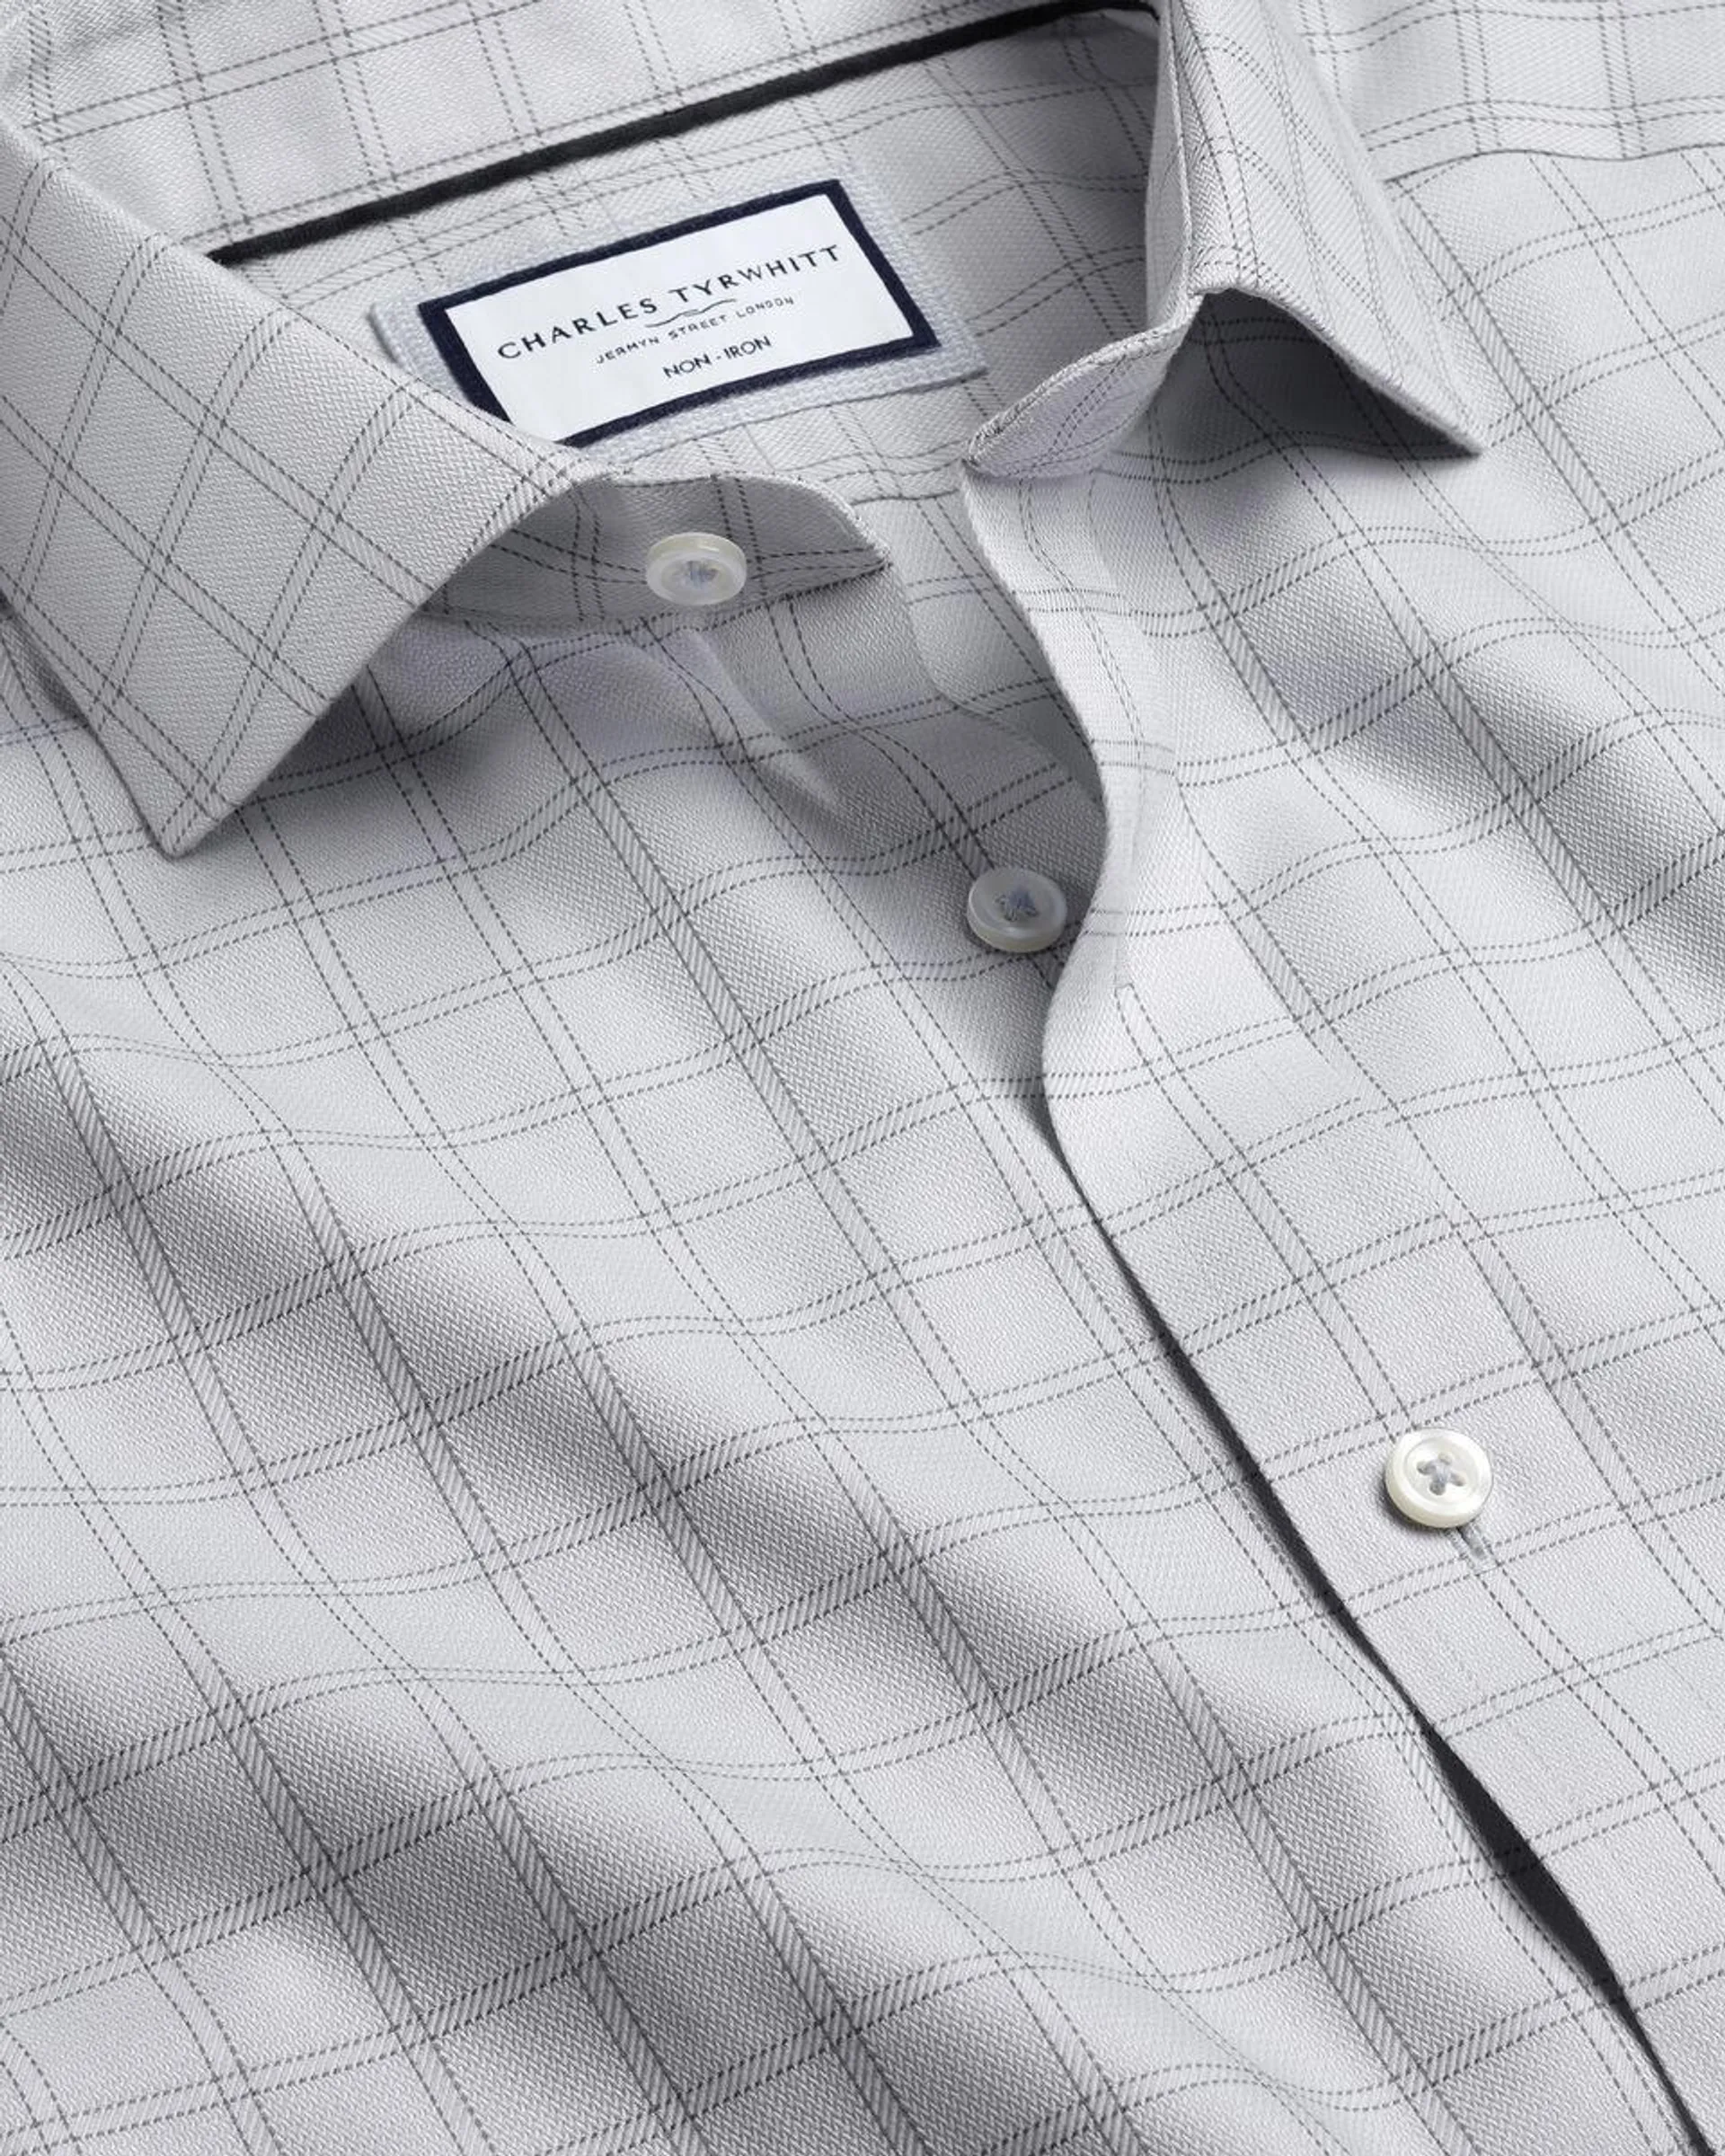 details about product: Cutaway Collar Non-Iron Mayfair Weave Check Shirt - Silver Grey